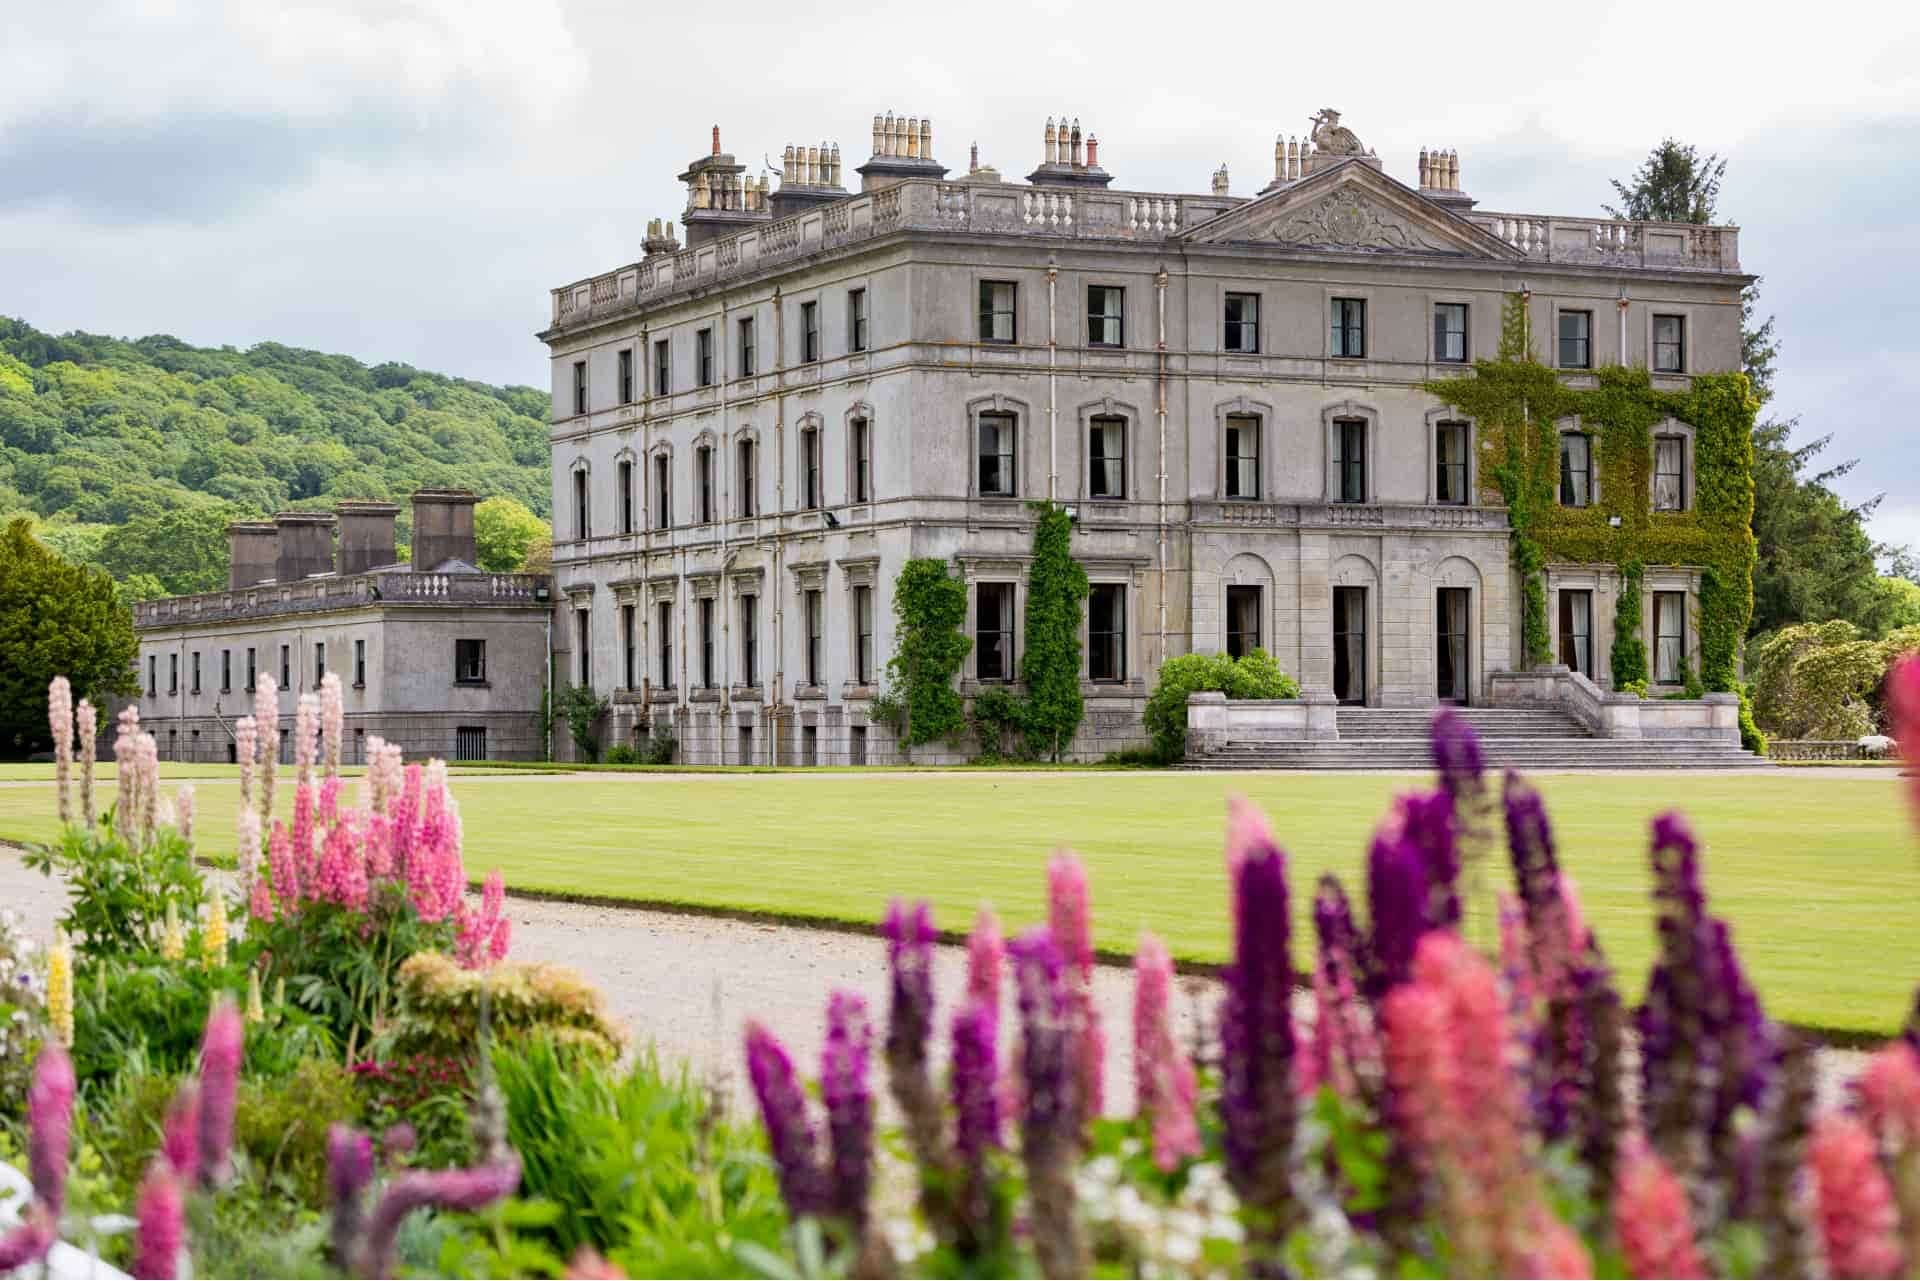 Visit Curraghmore House and learn about Ireland's Ancient Past with you guided tours